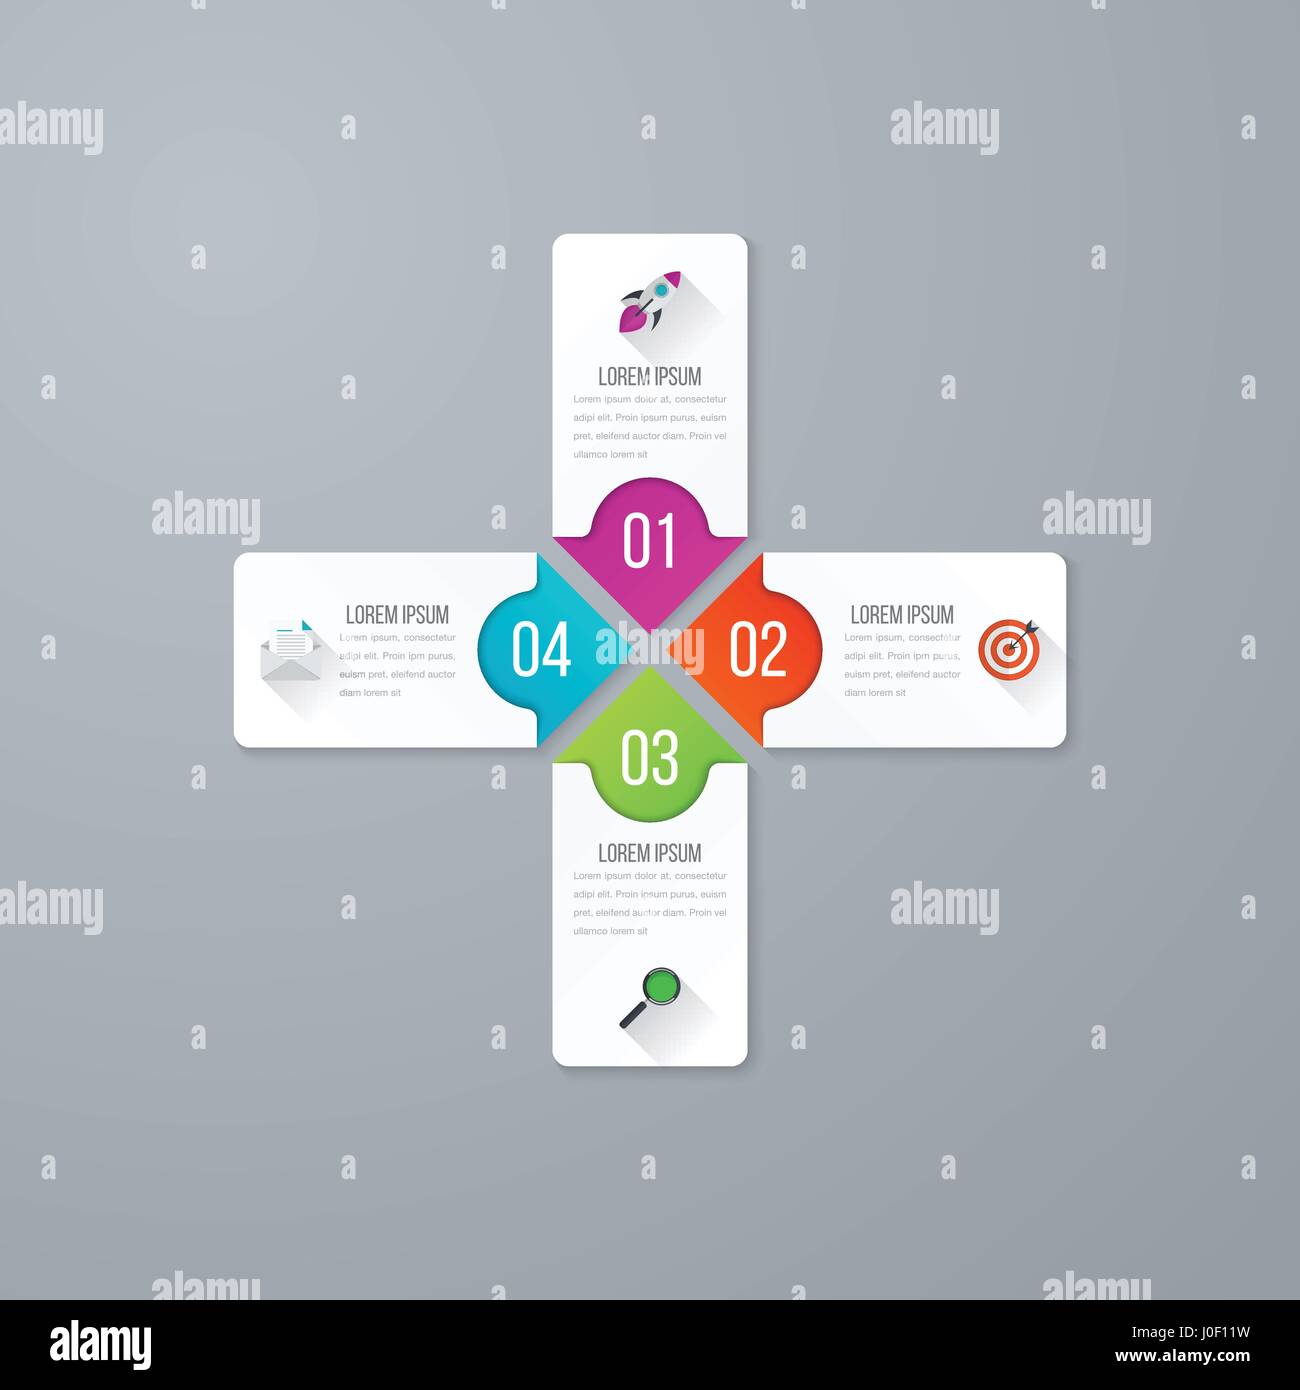 Business infographic. Vector illustration. Stock Vector